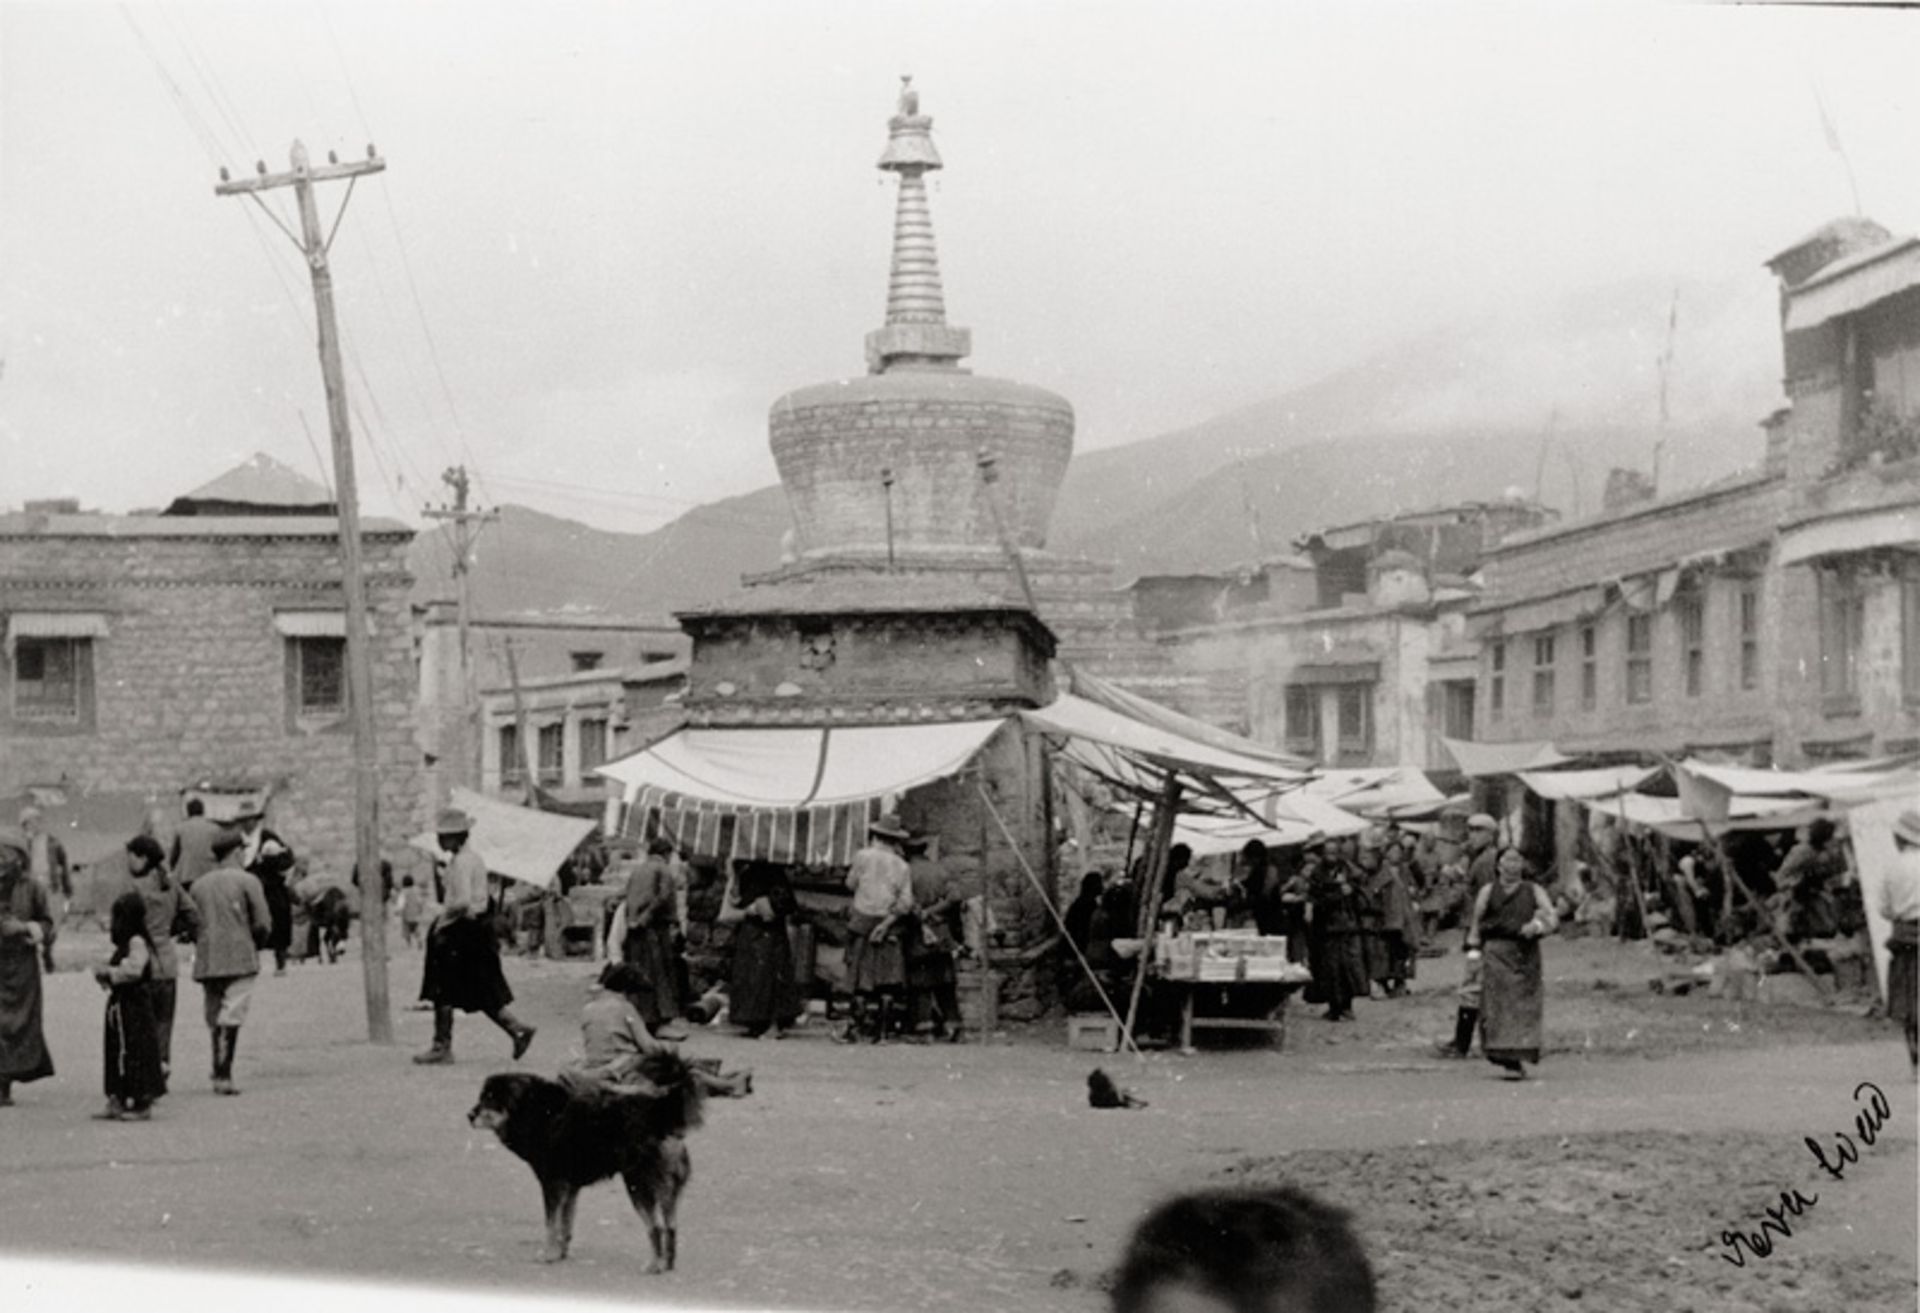 Siao, Eva: Images of Lhasa and the Potala Palace - Image 2 of 2